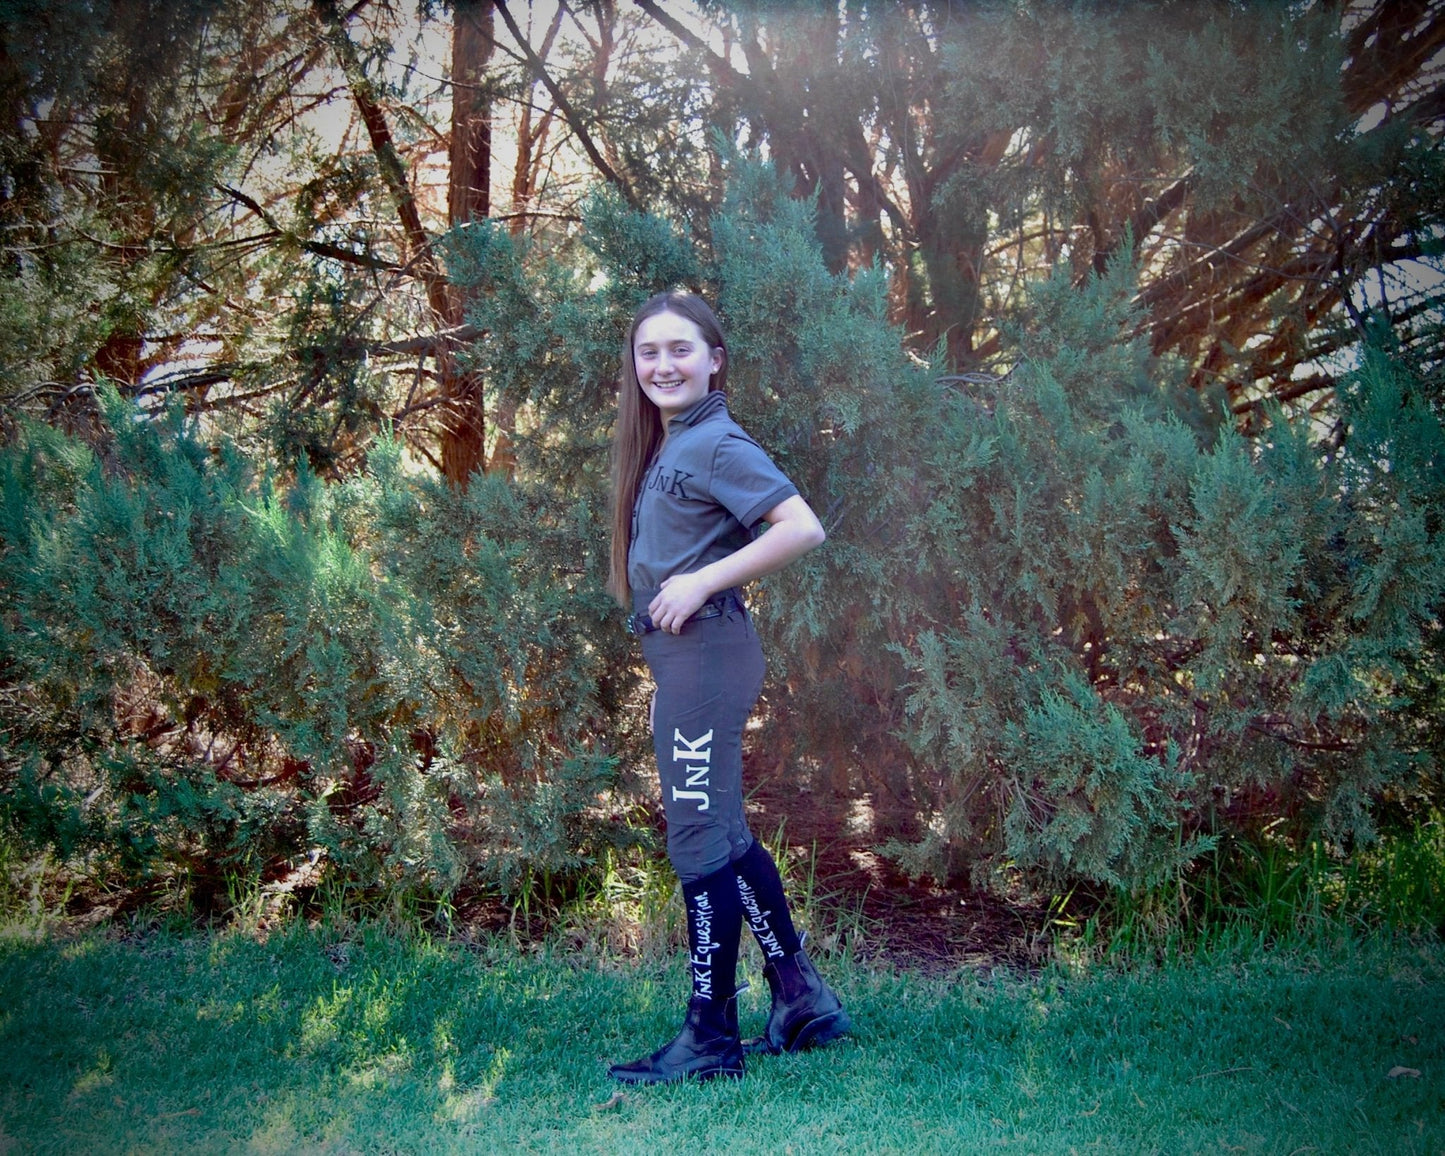 Smiling girl posing in horse riding tights near green bushes.